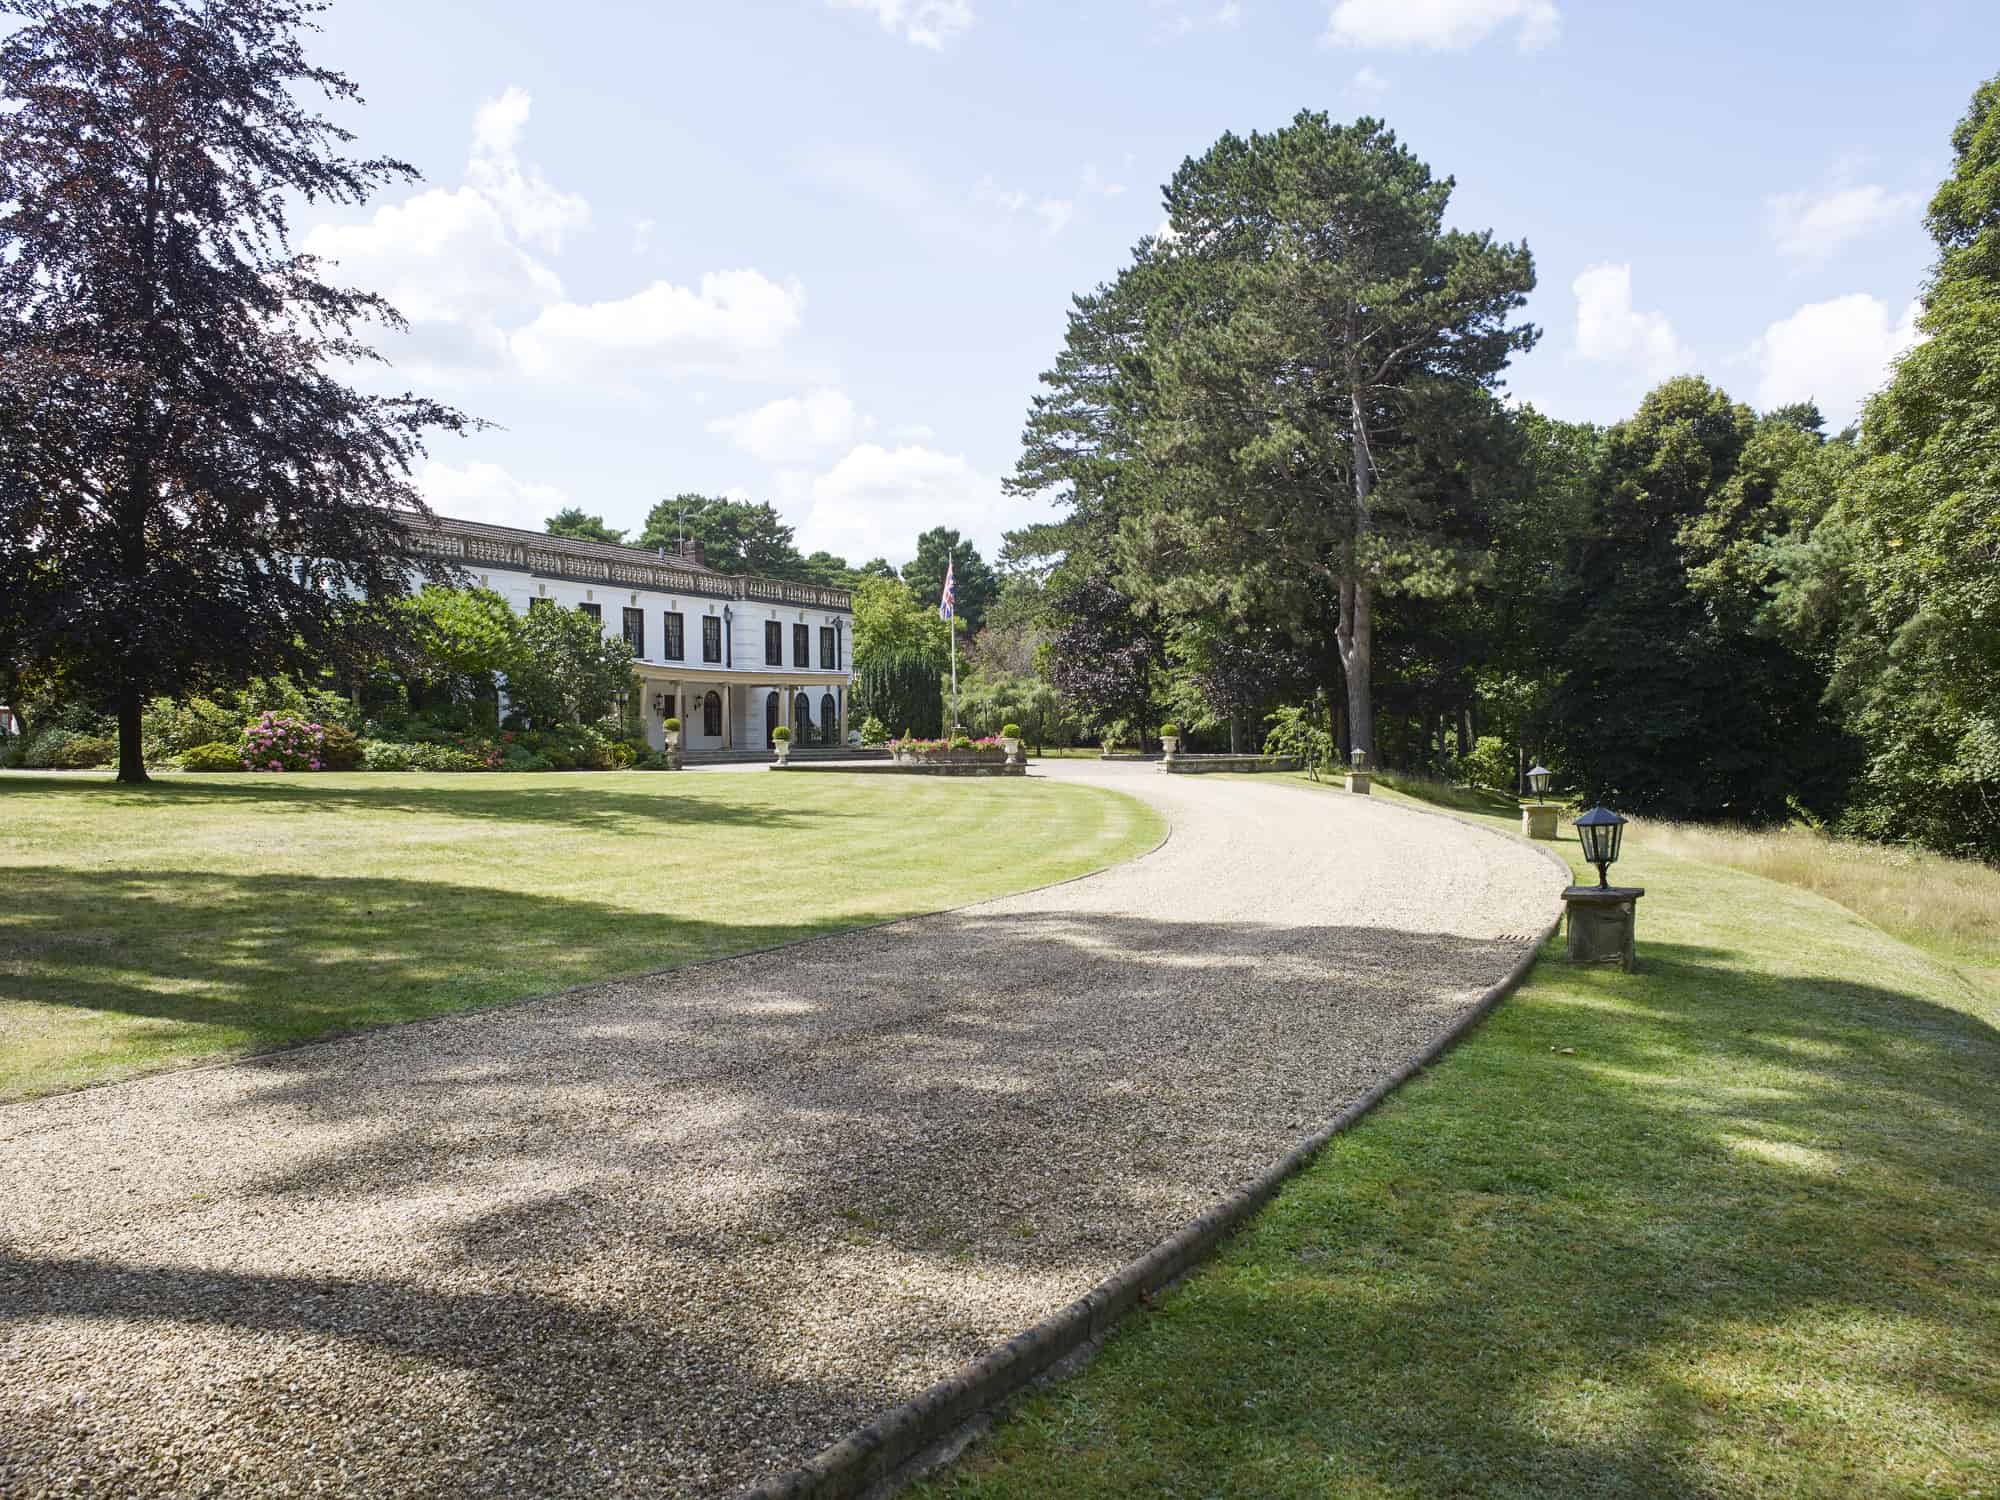 Oak Estate GU10 - A large manor house nestled in 10 acres. There is an outdoor pool and pool house, plus a contemporary coach house - The Location Guys